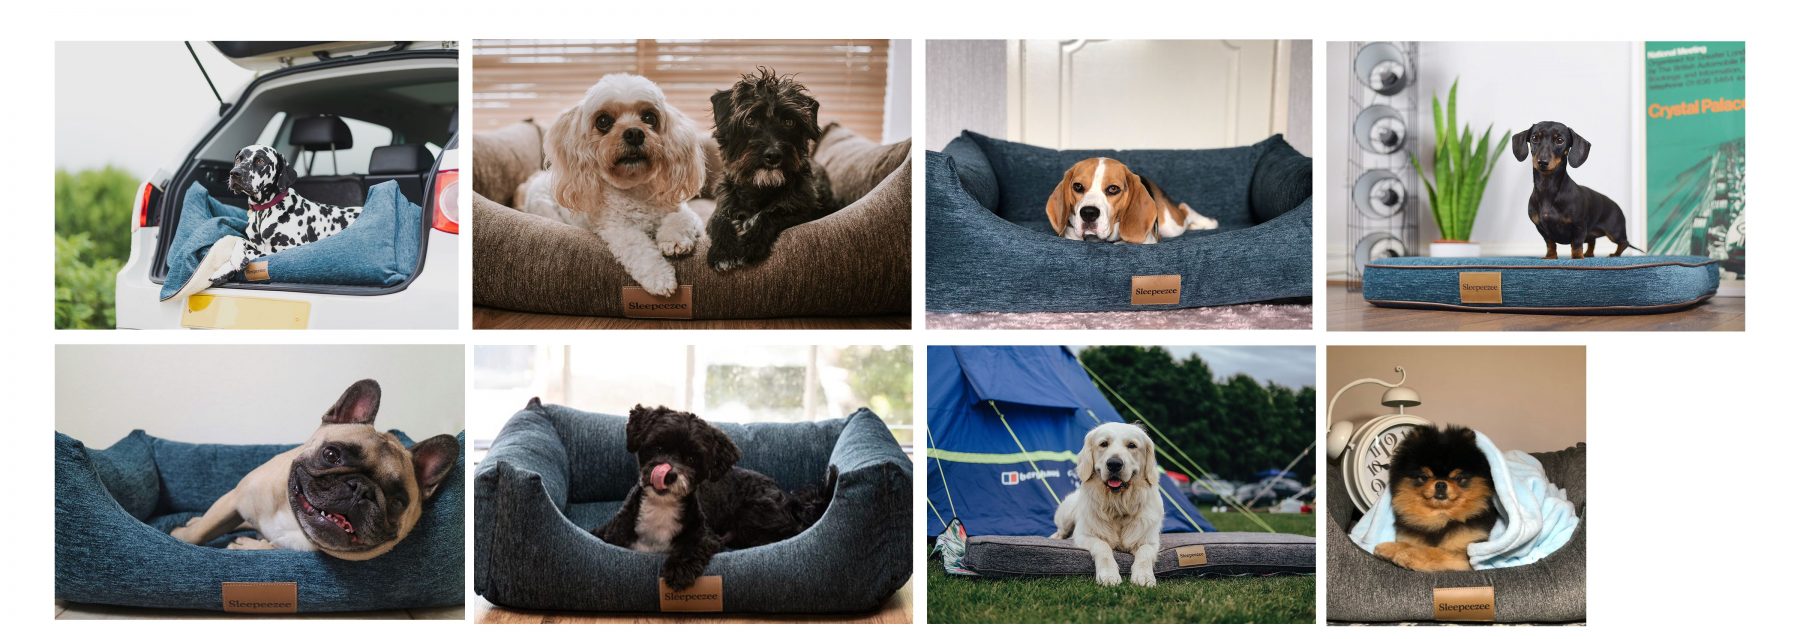 Collage of dogs in Sleepeezee Dog Beds